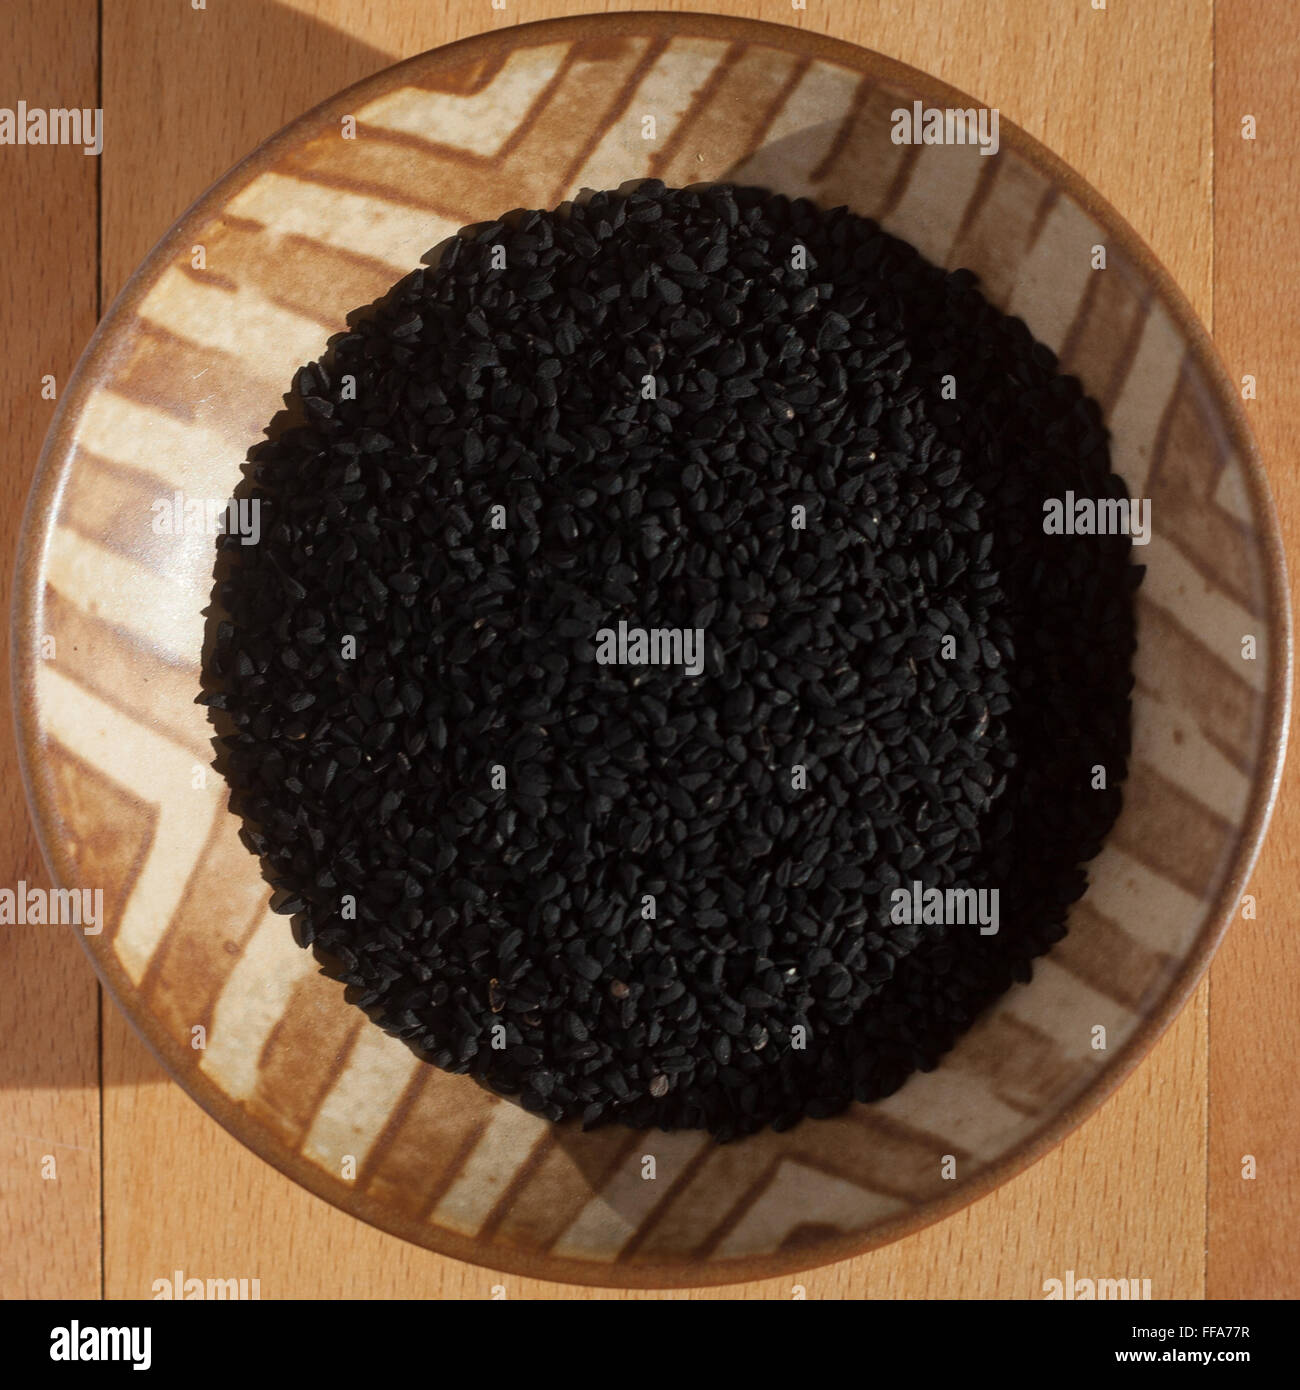 Nigella seeds in patterned wooden bowl Stock Photo